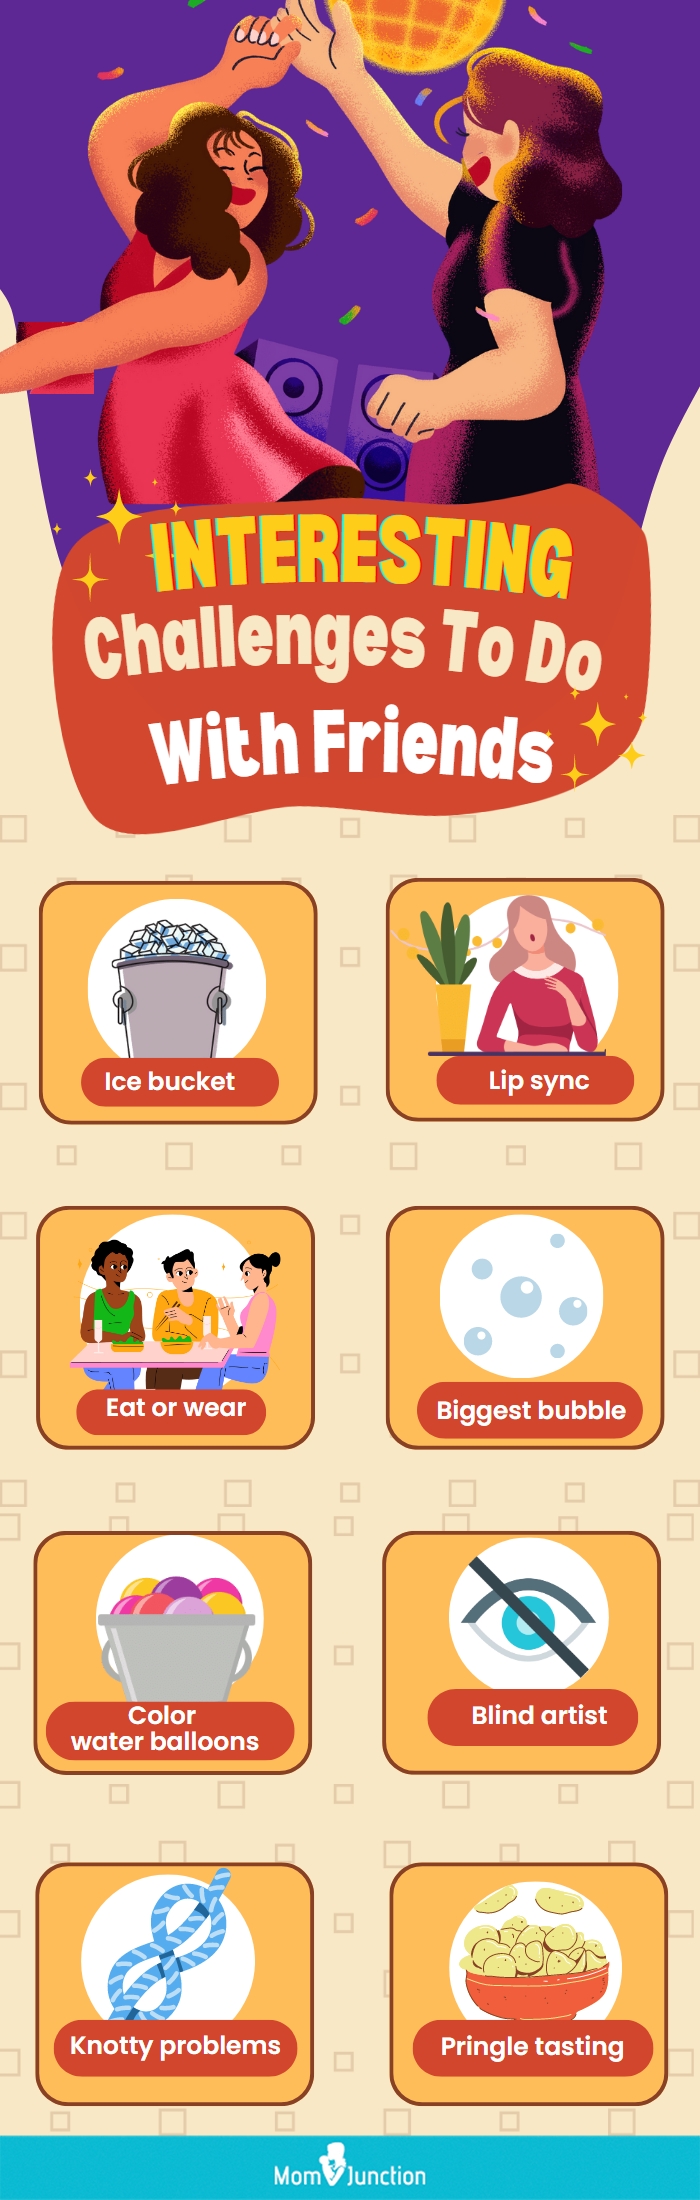 interesting challenges to do with friends (infographic)